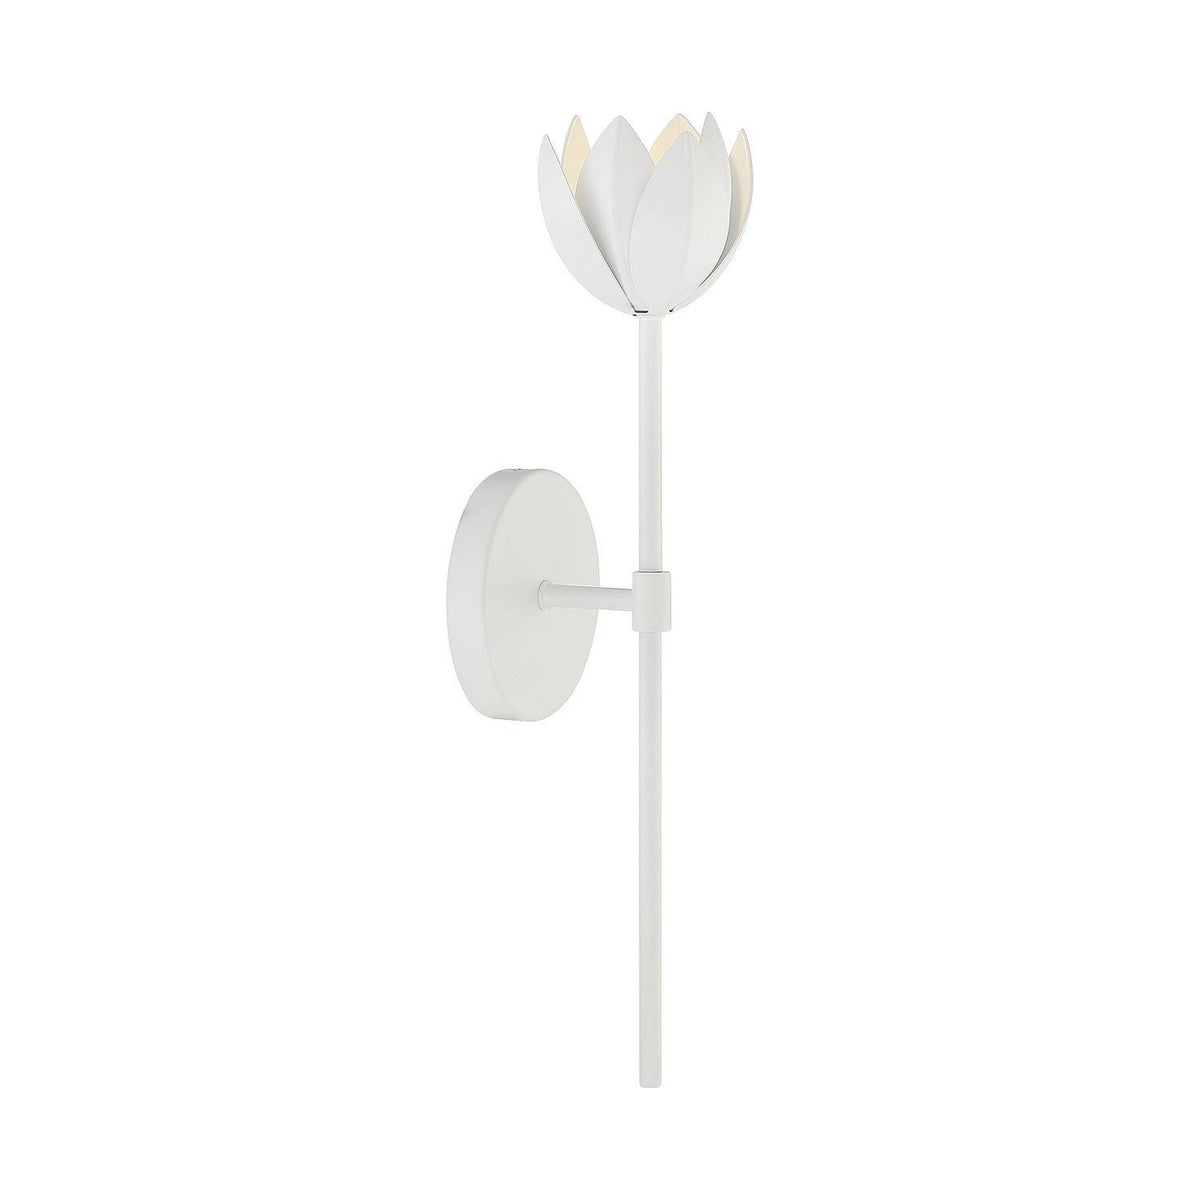 Meridian - M90081WH - One Light Wall Sconce - White